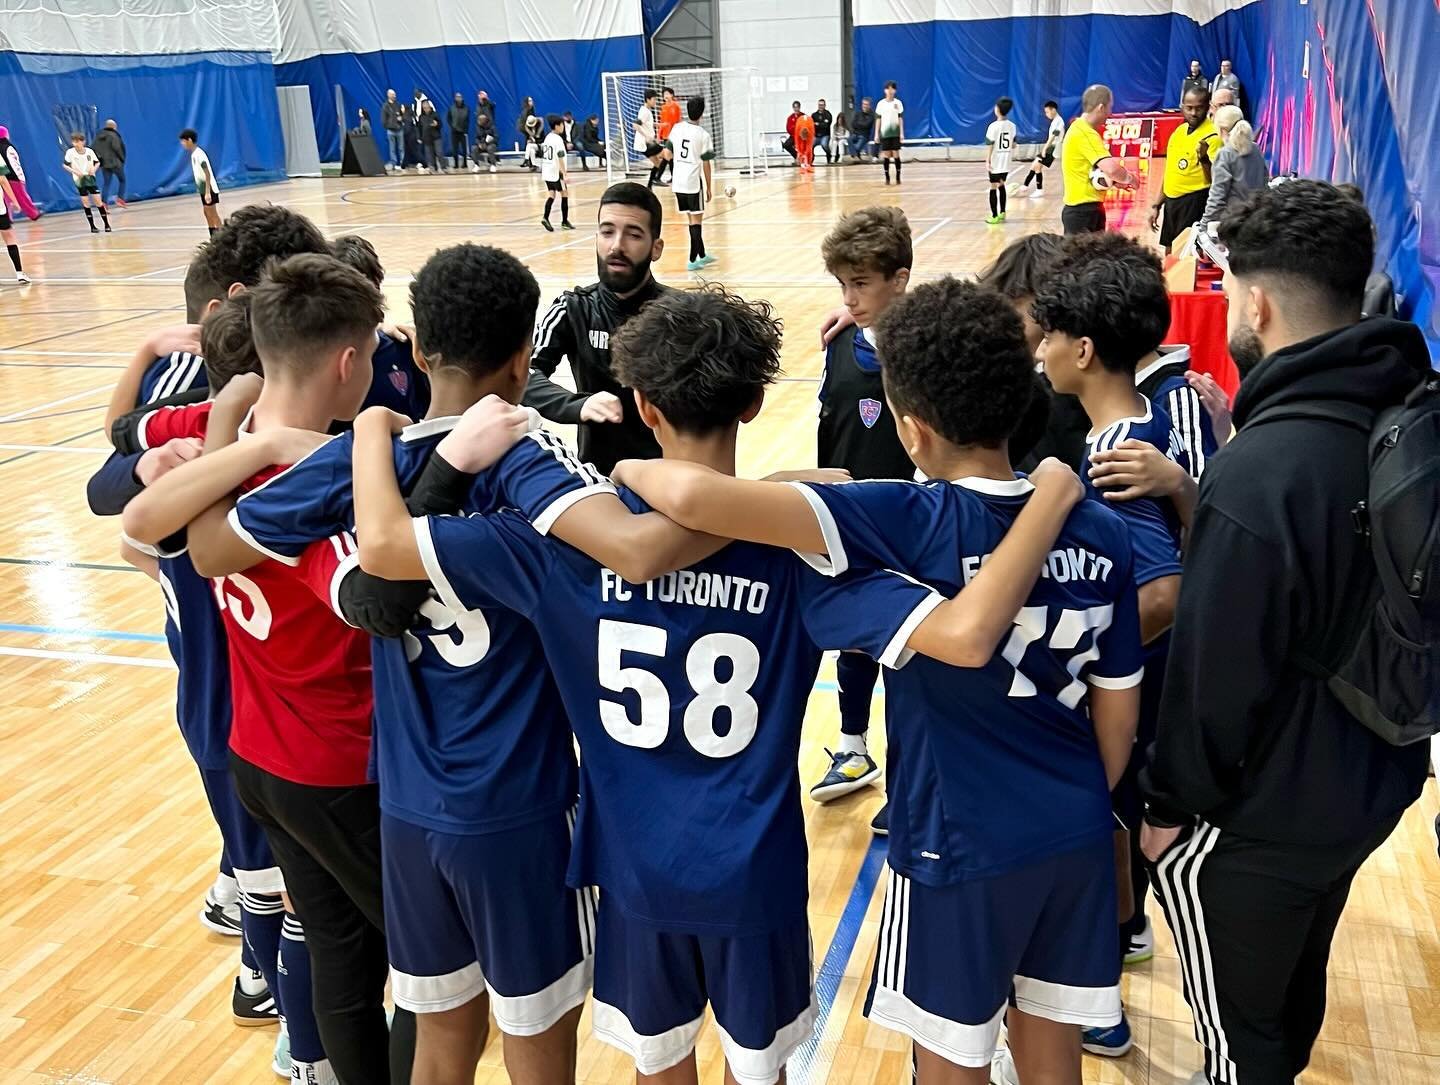 U14 Ontario Futsal Cup - Recap of Red team&rsquo;s first game vs Richmond Hill SC with an 8-1 win